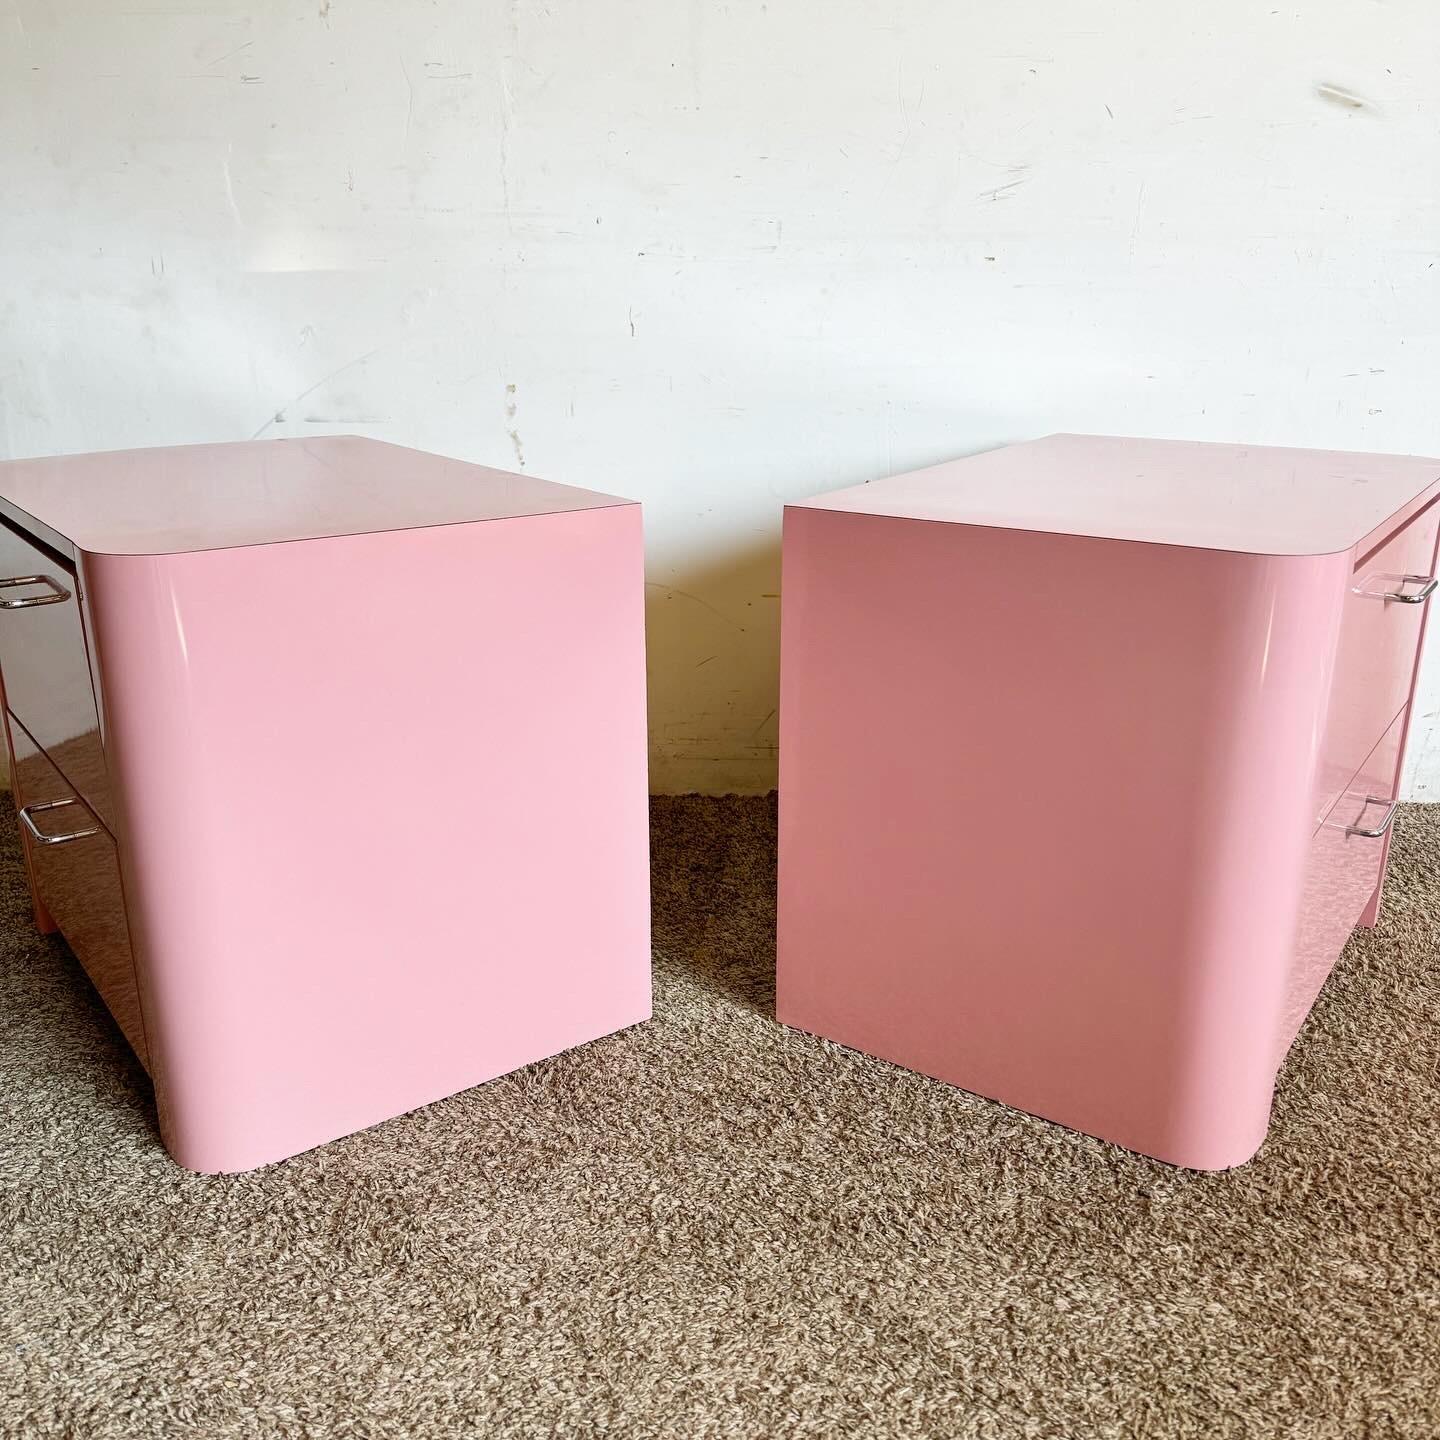 Postmodern Pink Lacquer Laminate Nightstands With Chrome Handles - a Pair In Good Condition For Sale In Delray Beach, FL